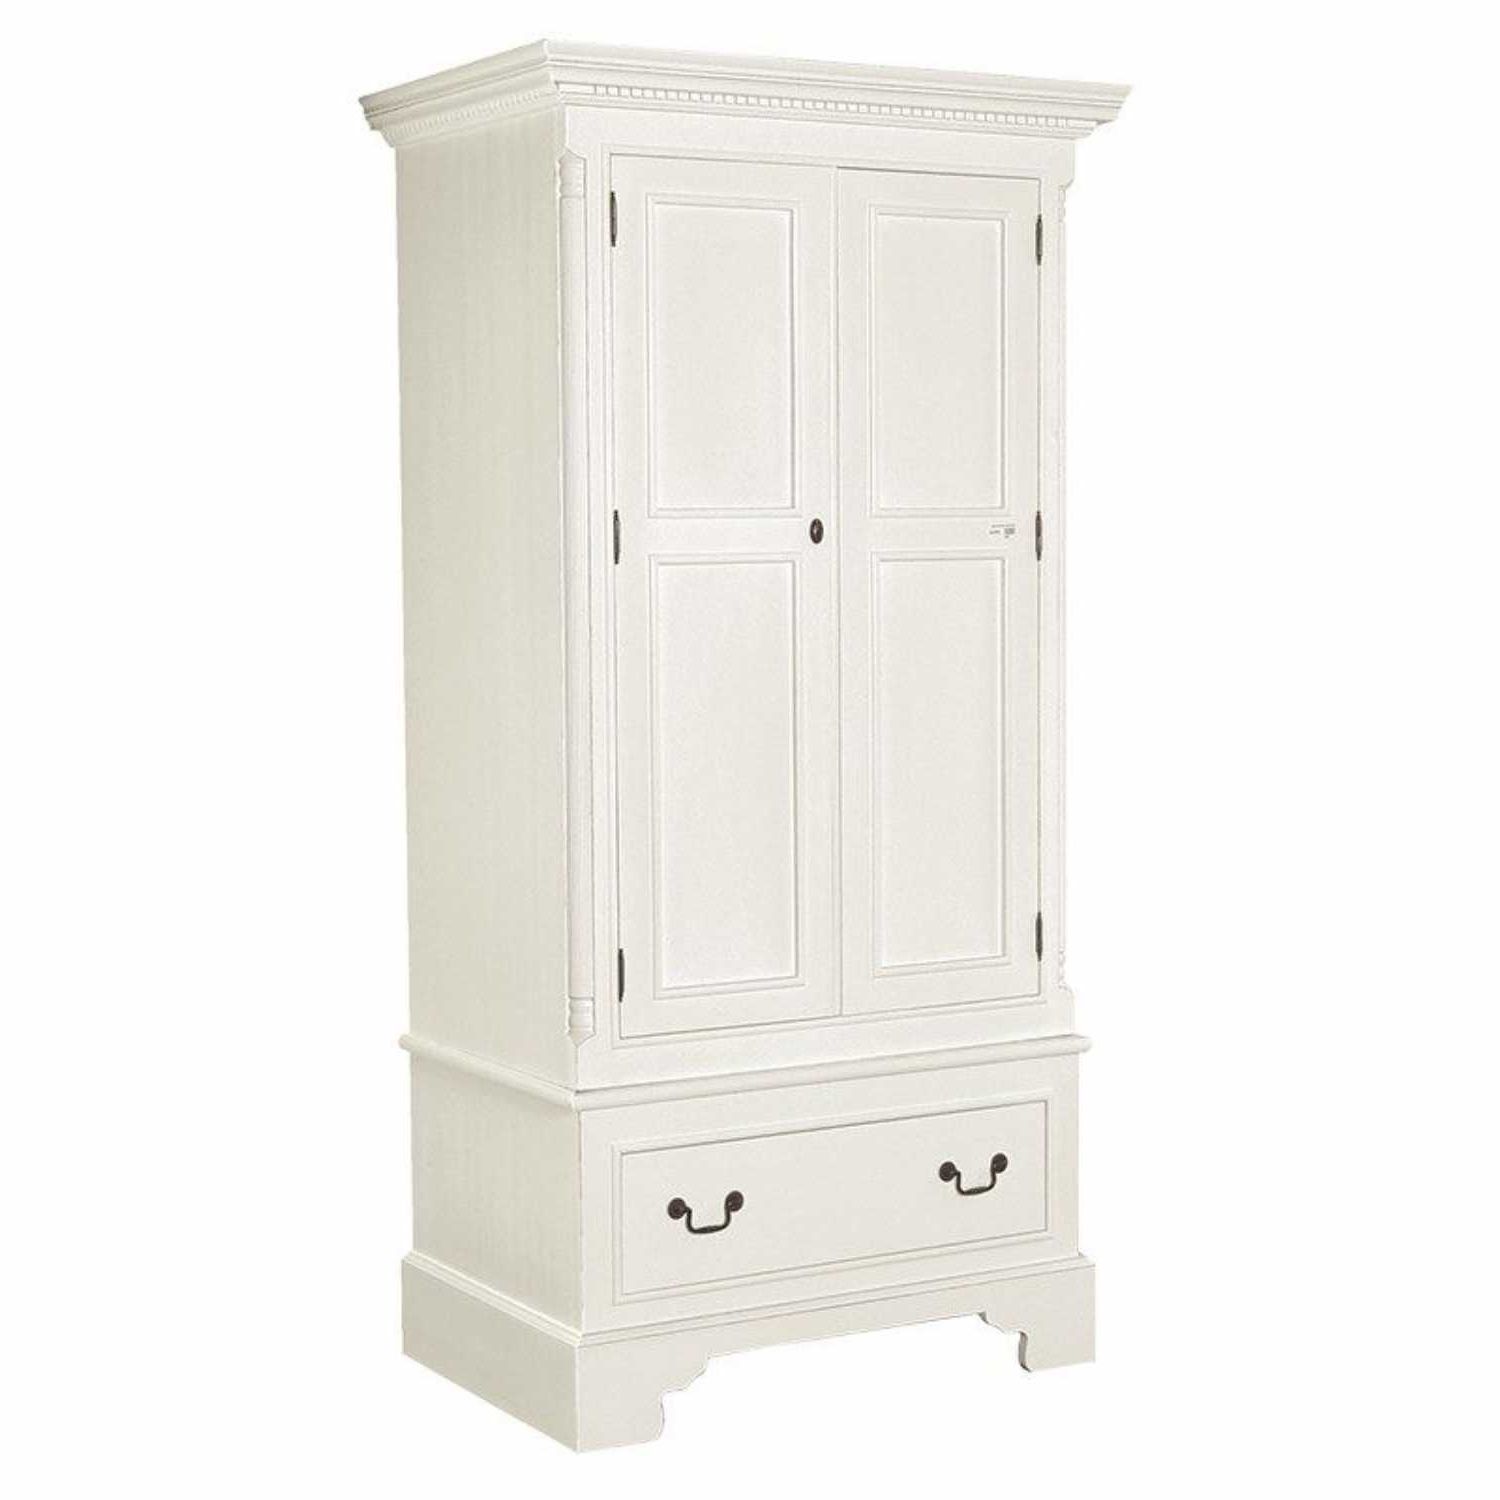 Georgian Shabby Chic White Painted Small Double Wardrobe With Drawer Regarding 2017 Shabby Chic White Wardrobes (View 9 of 15)